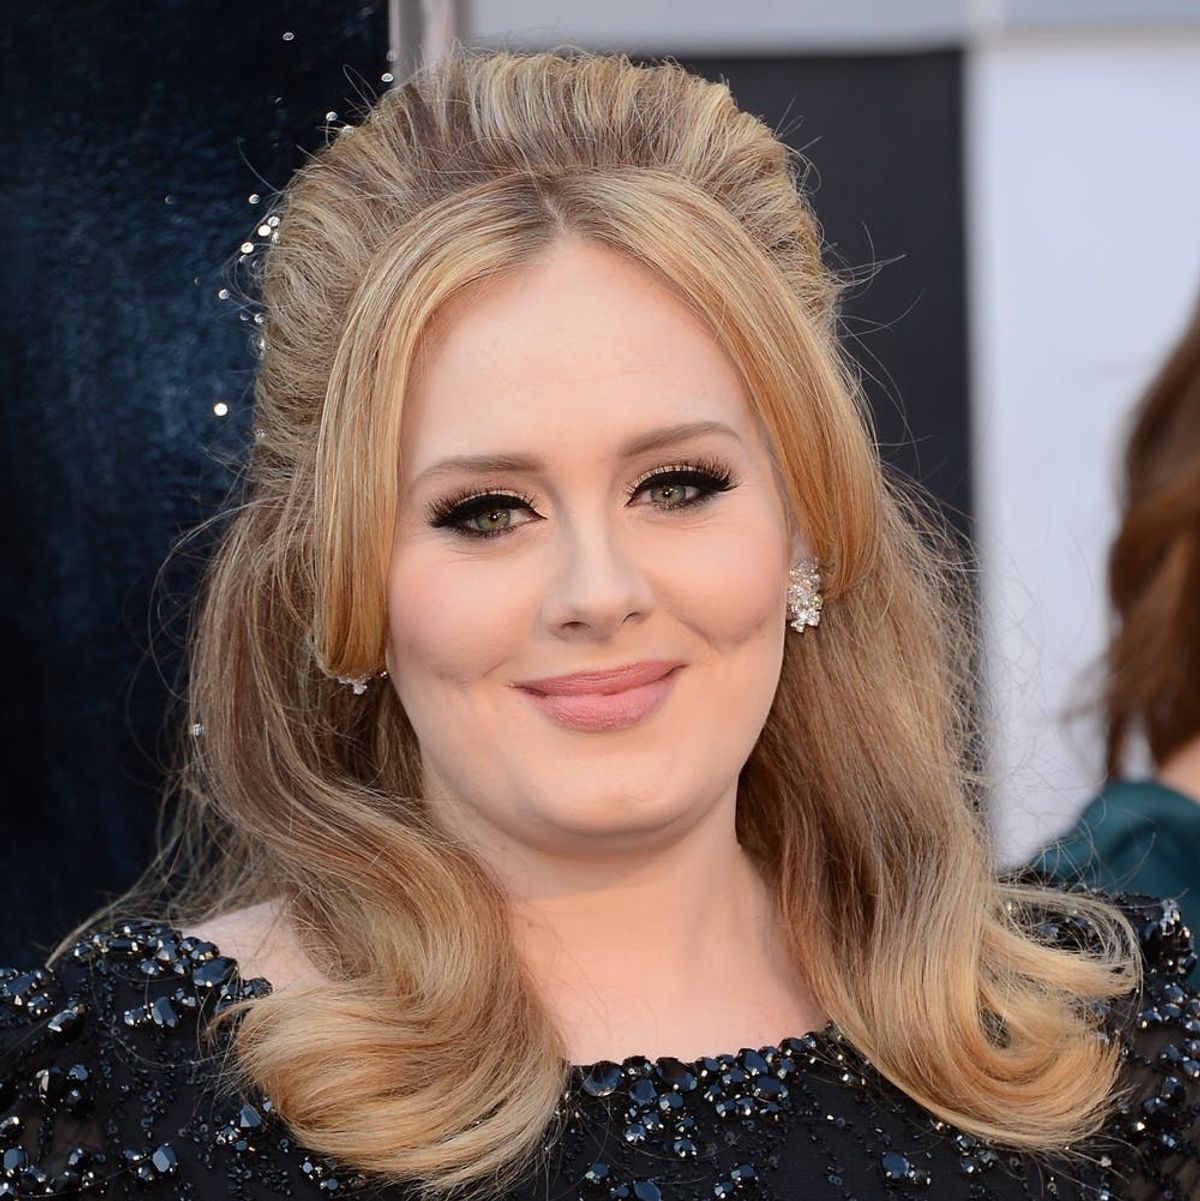 Adele Might Be Launching a Clothing Line